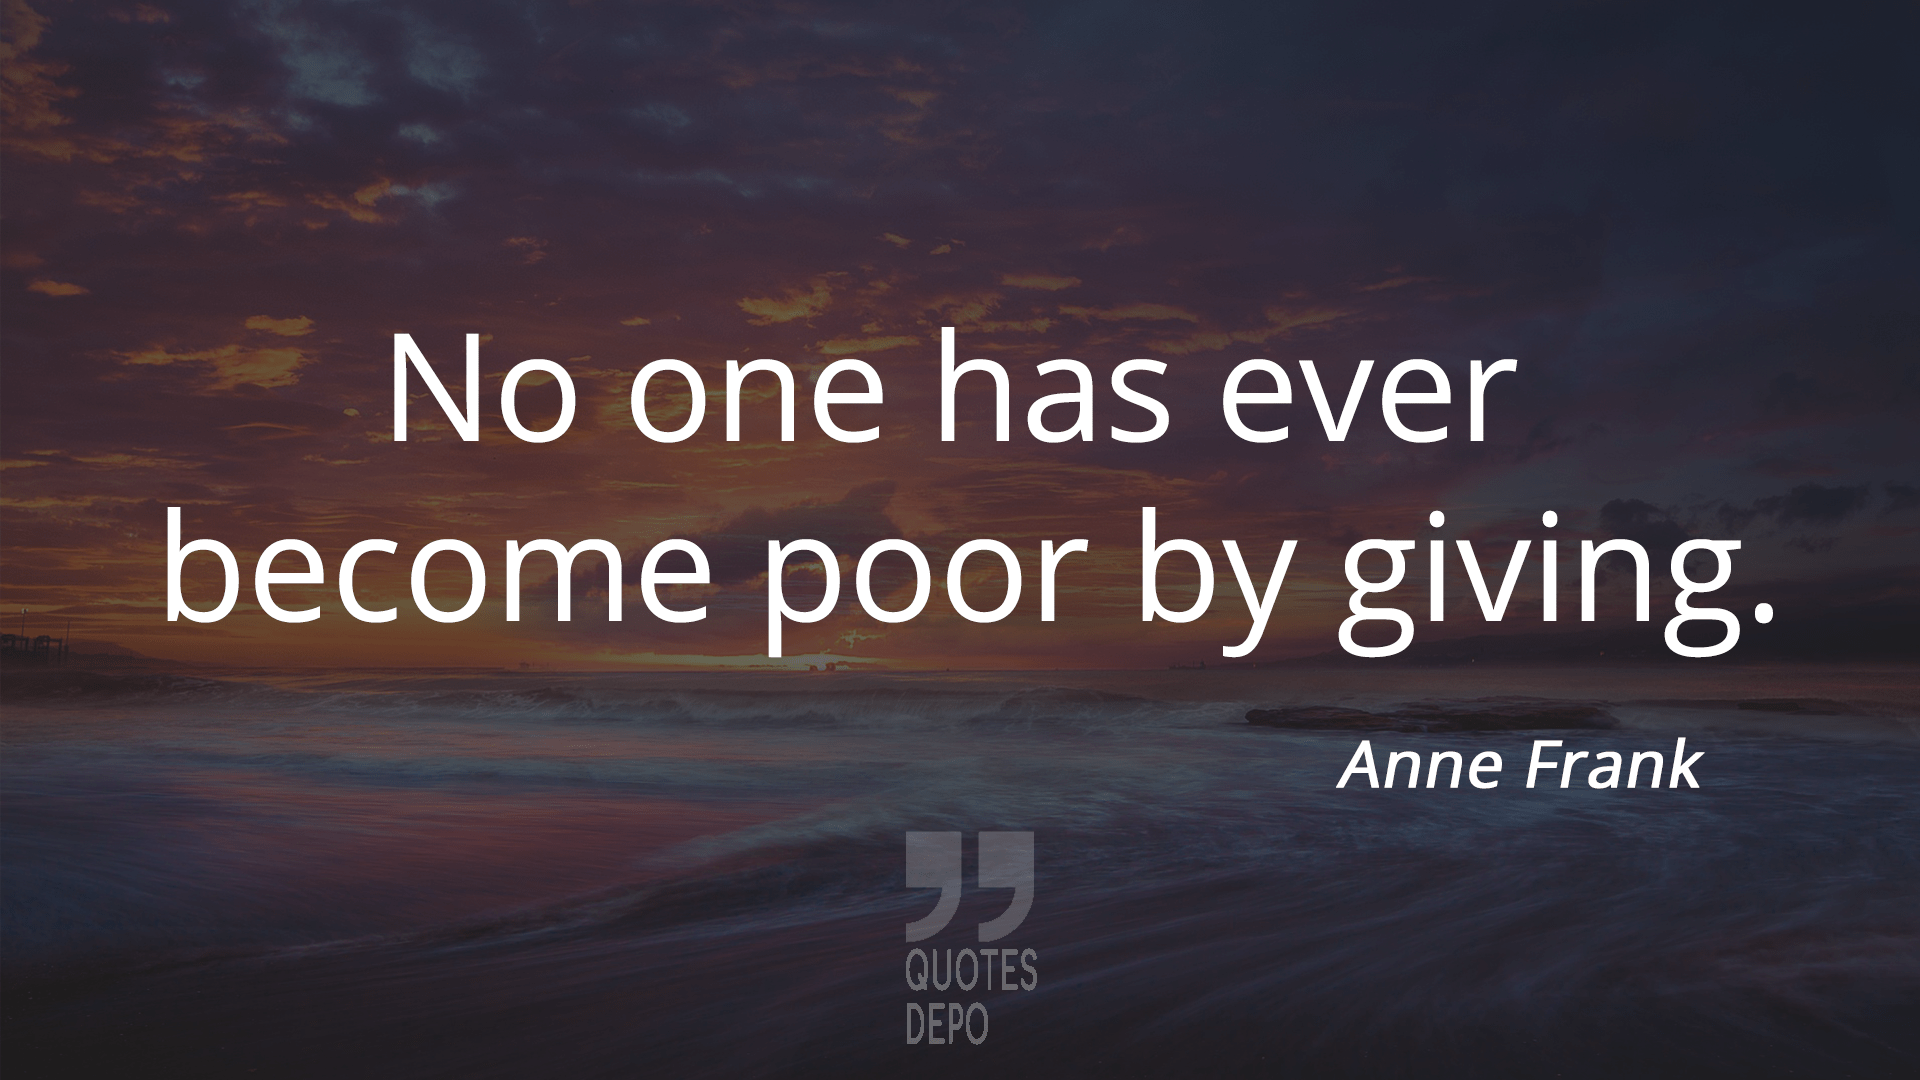 no one has ever become poor by giving - anne frank quotes